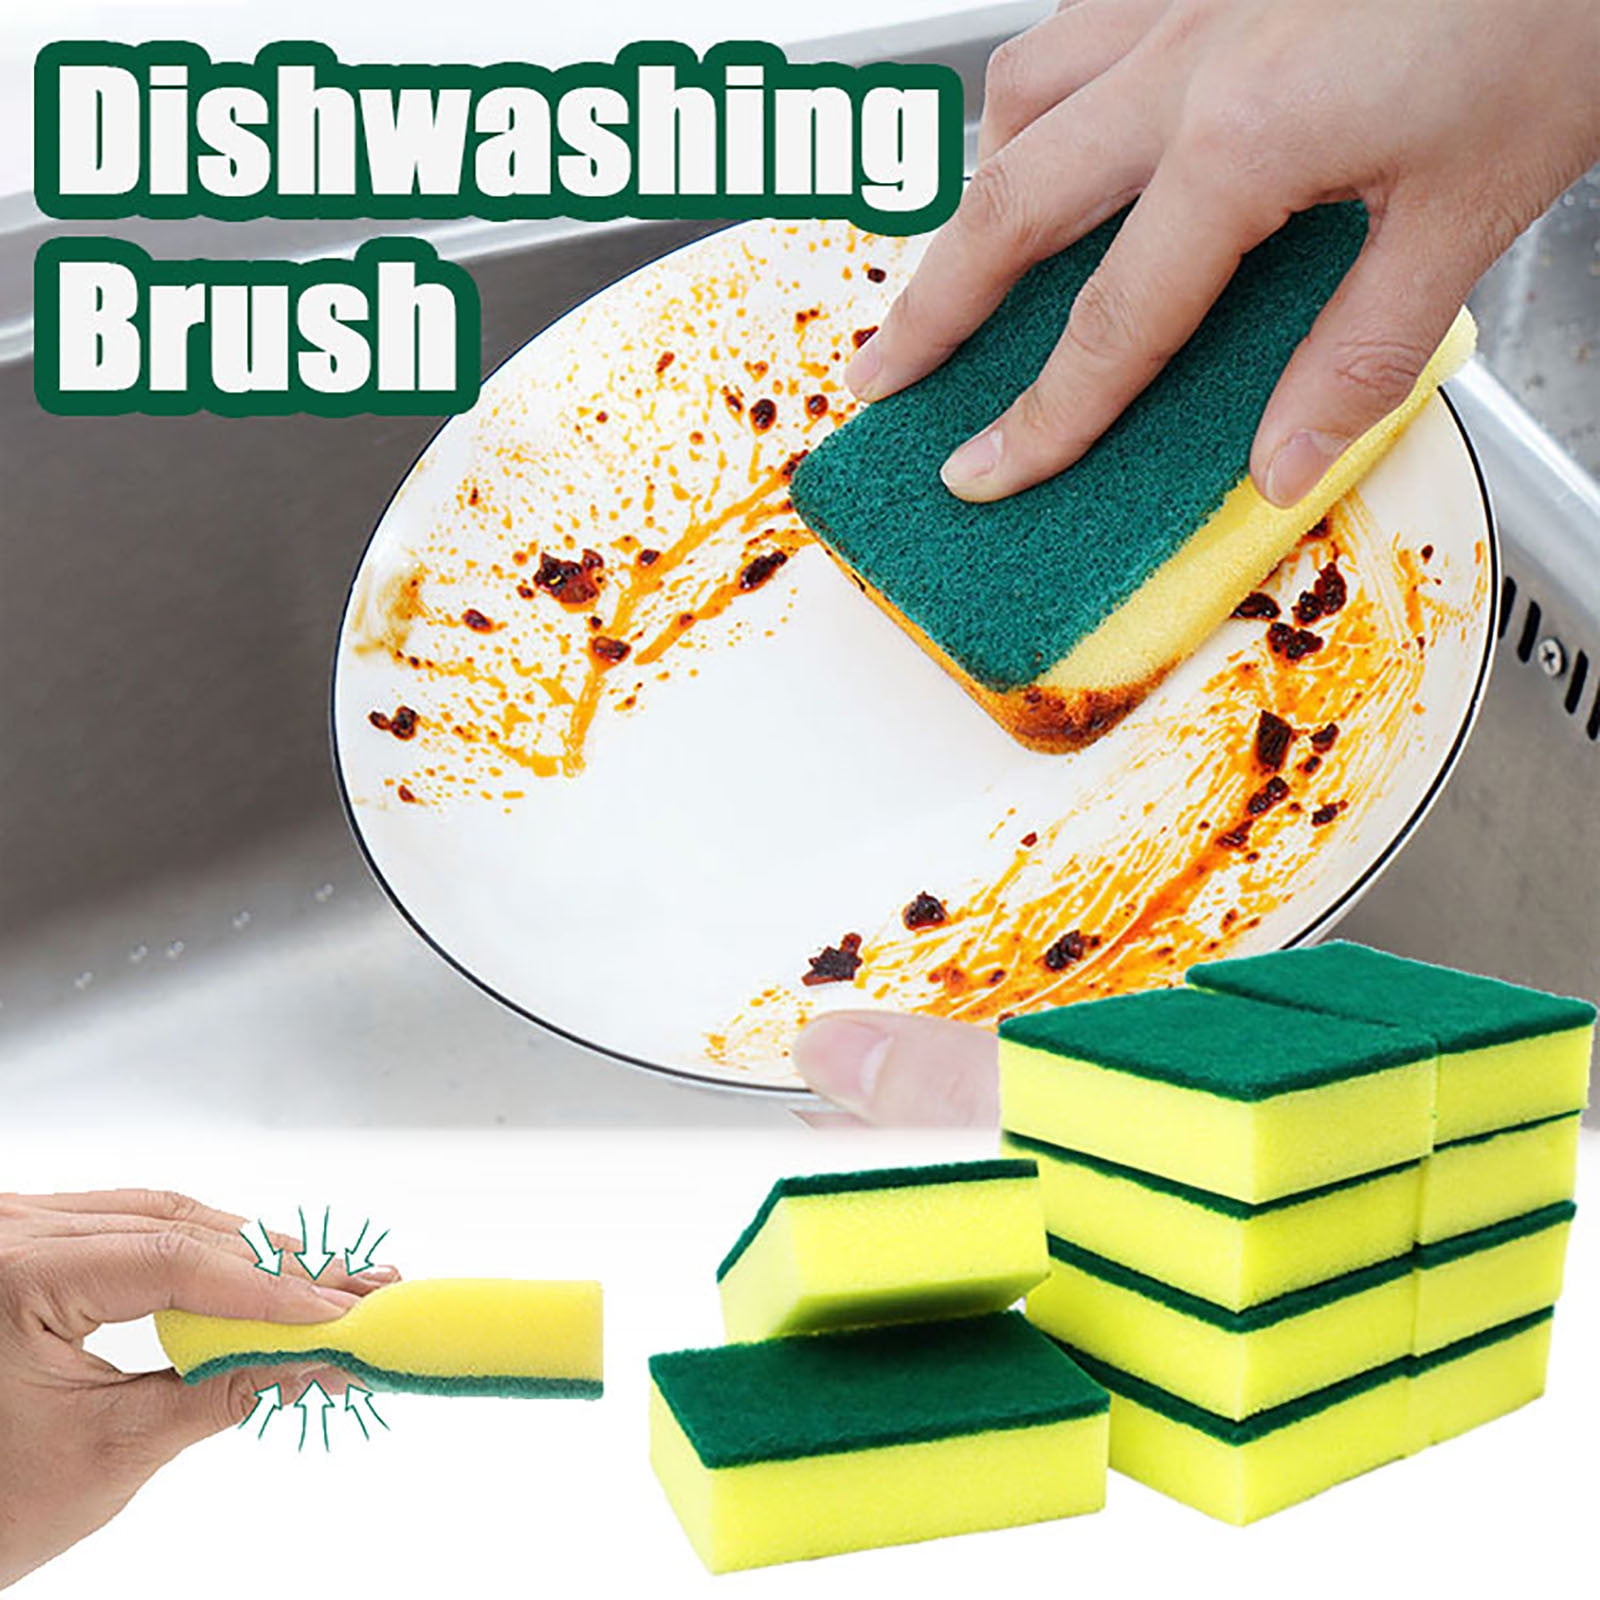 Kitchen Cleaning Sponge,Eco Non-Scratch for Dish,Scrub Sponge (Pack of 50), Size: 50pcs